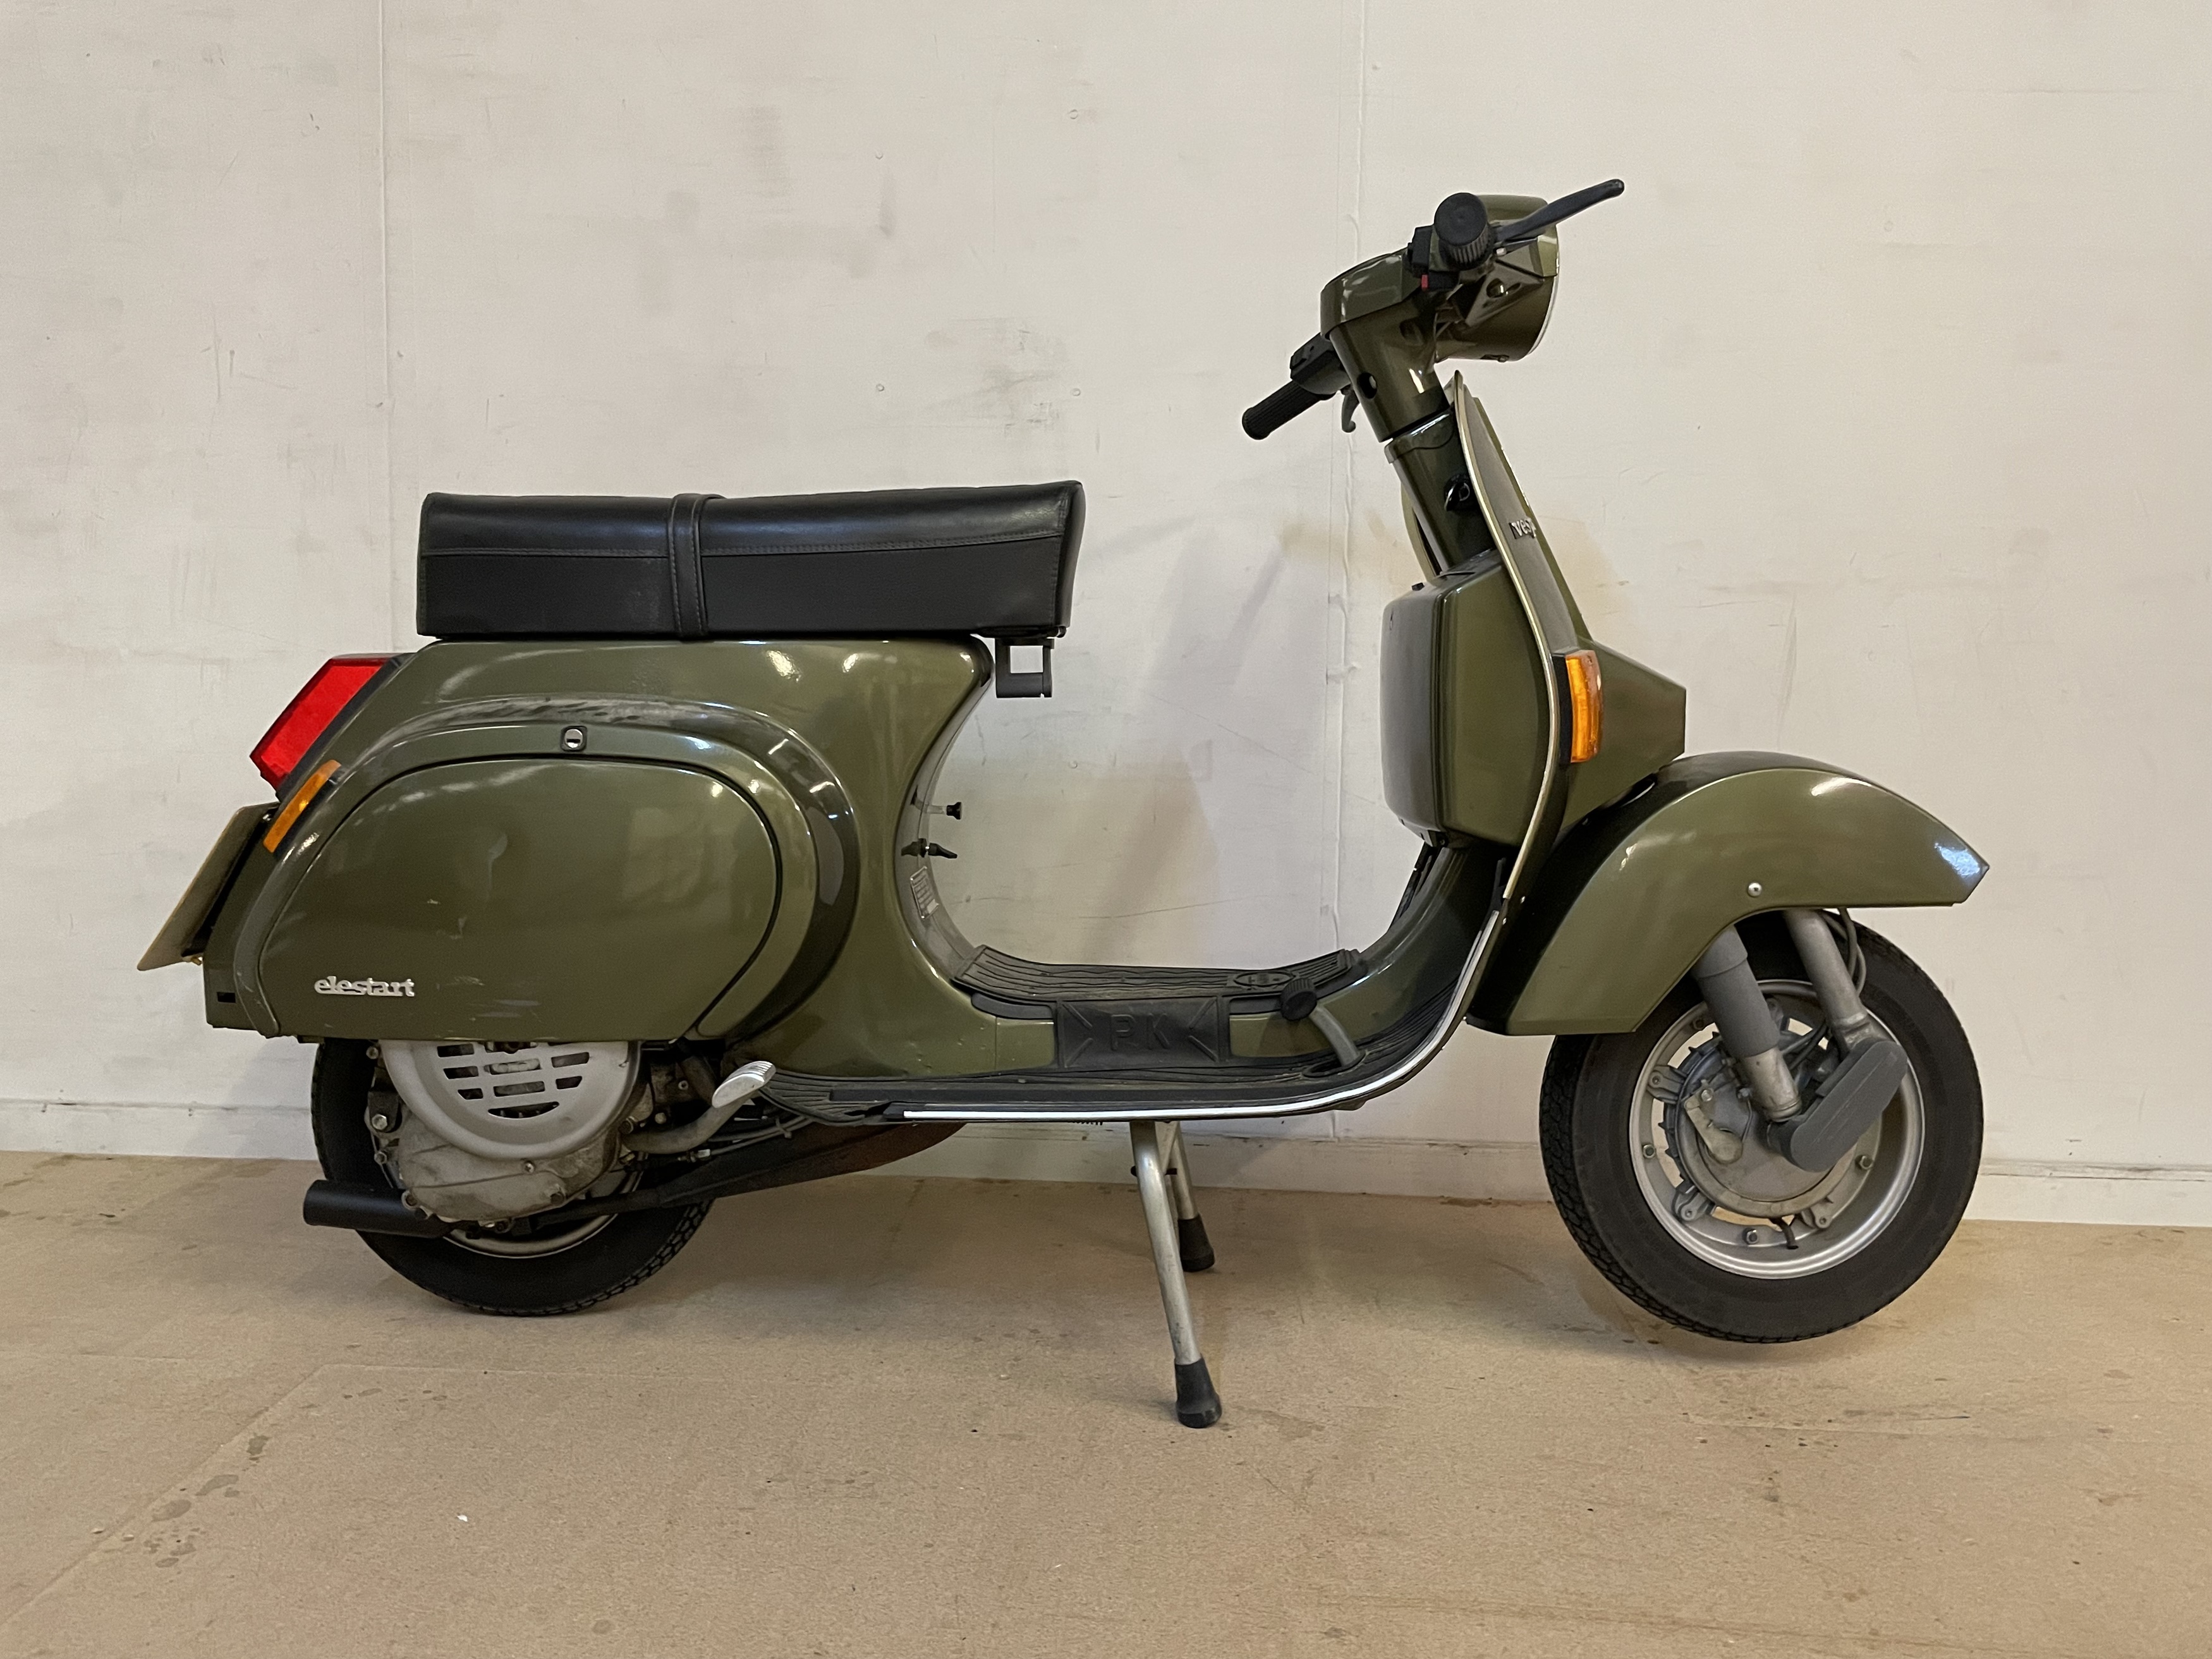 Lawbreakers to law enforcers: historic scooters with infamous connections up for sale